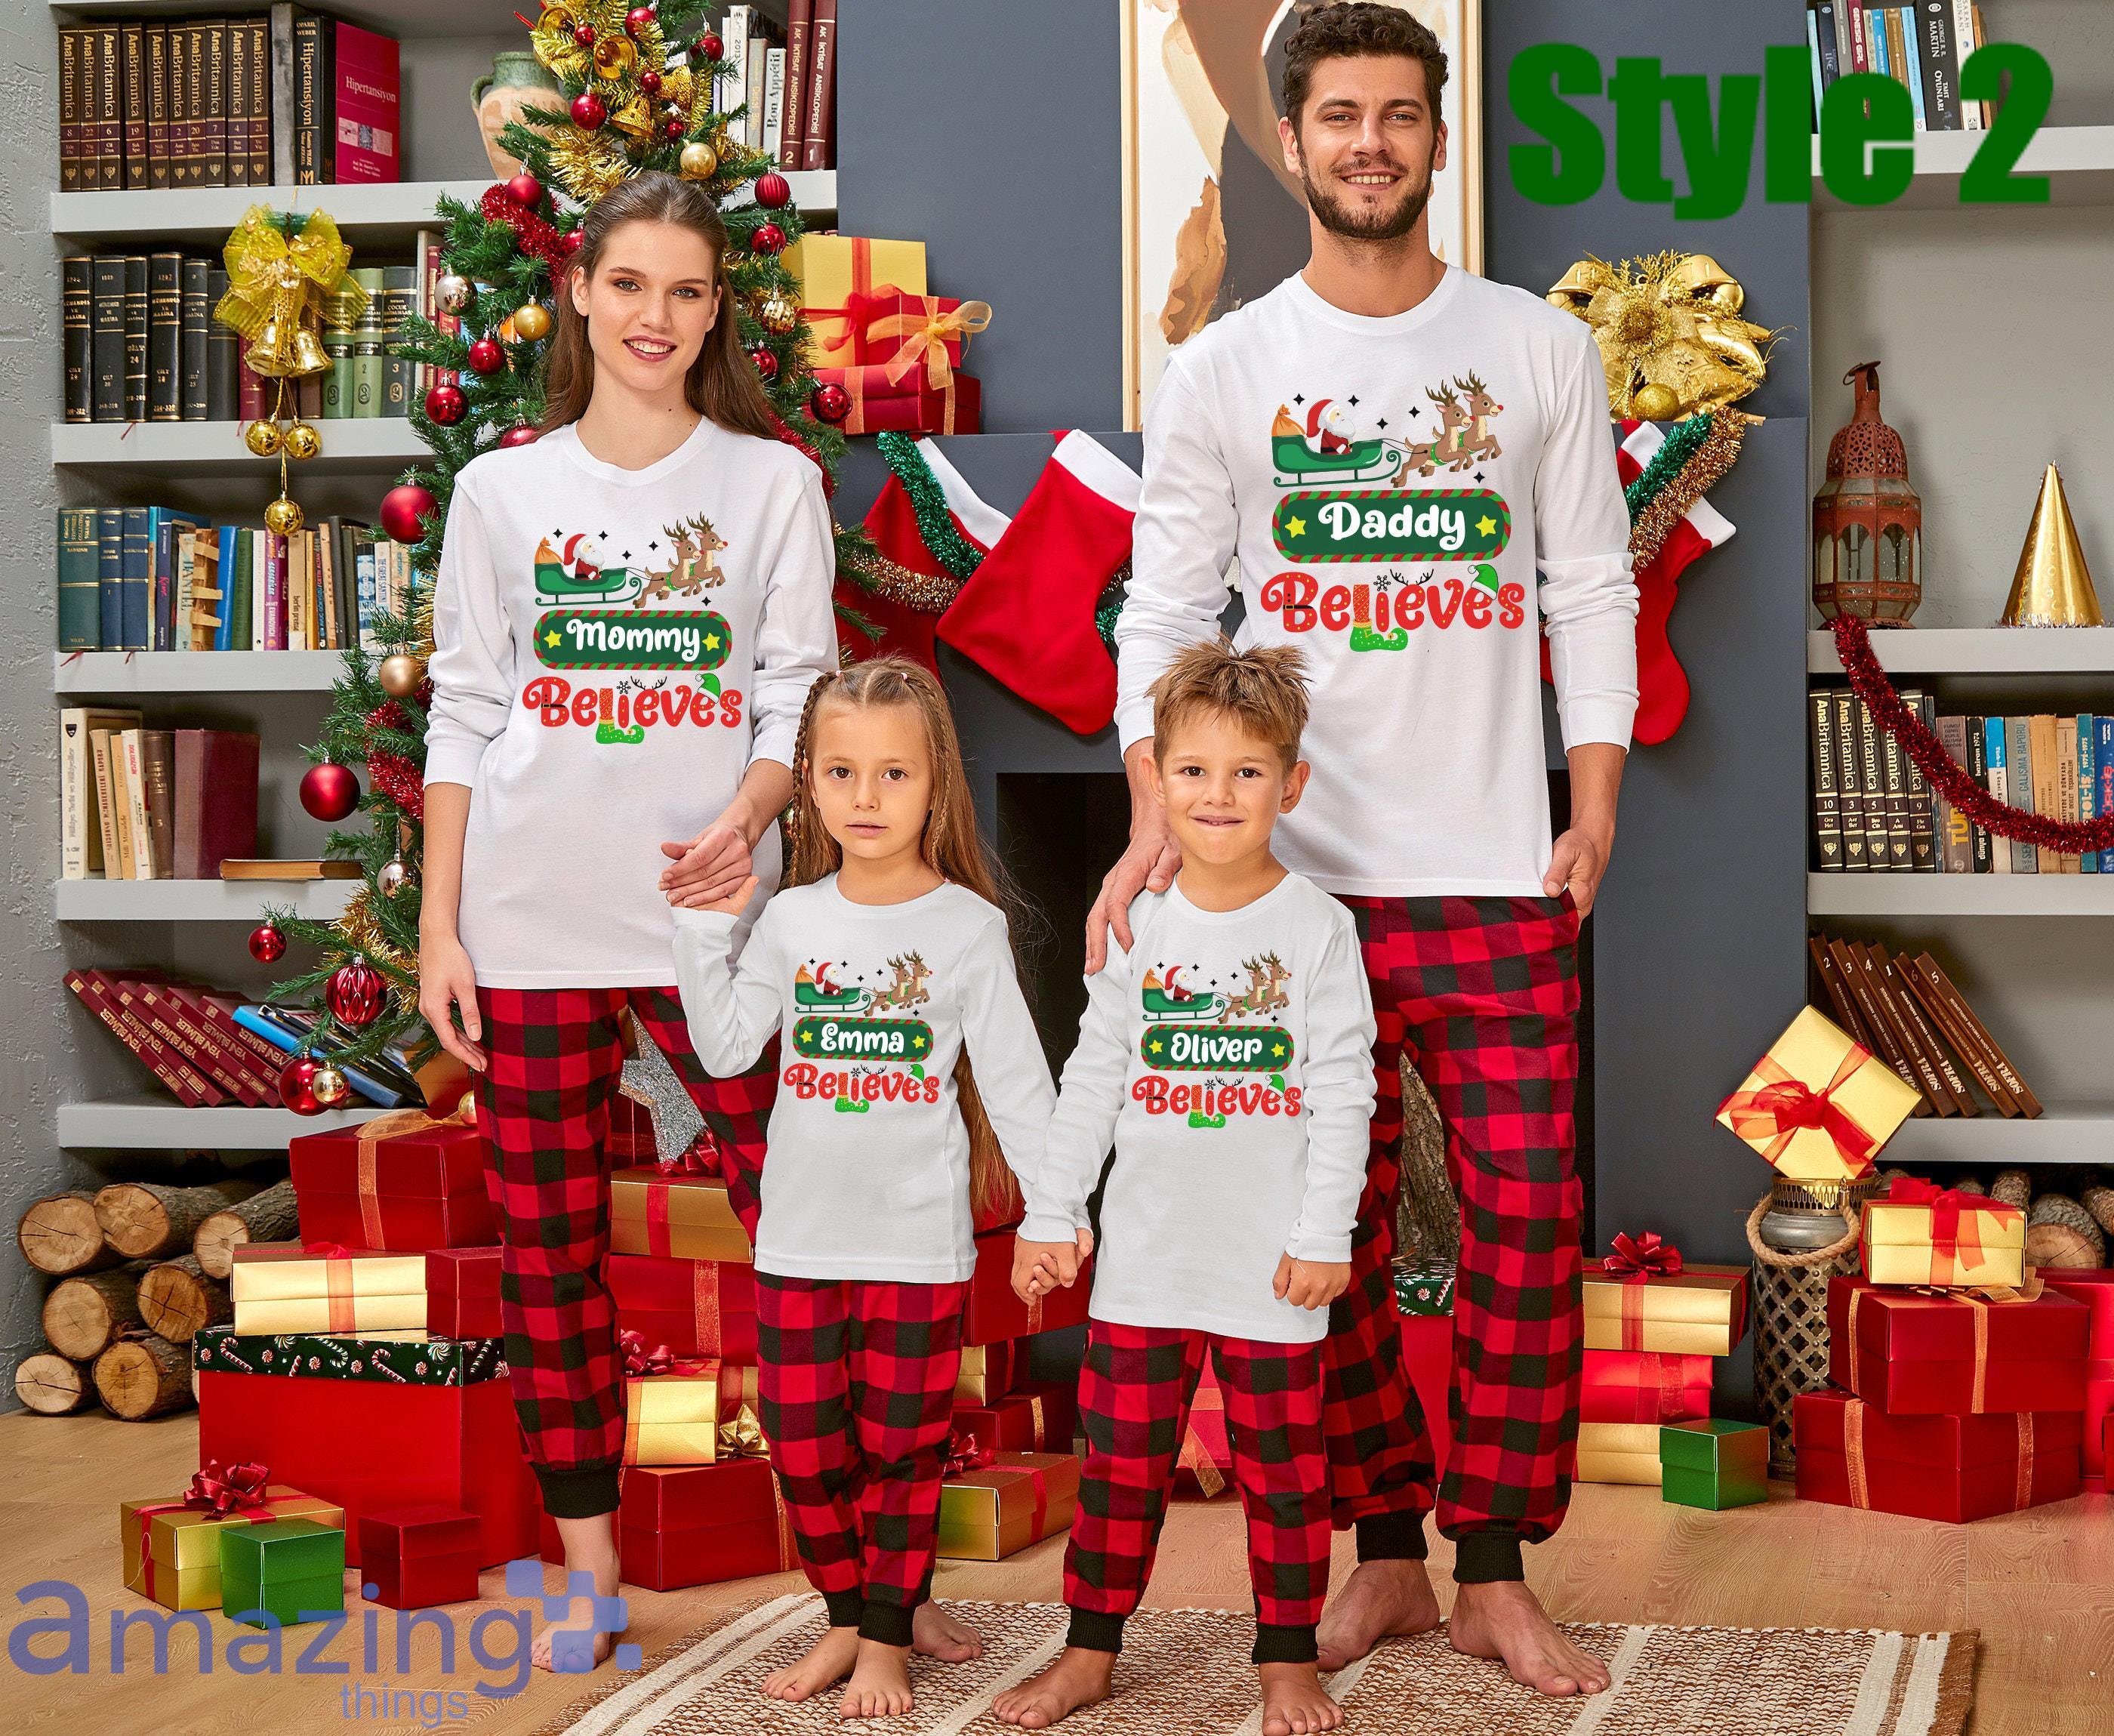 Louisville Cardinals Personalized Name Pajamas Christmas Family Gift Sport  Fans Christmas Gift - Banantees